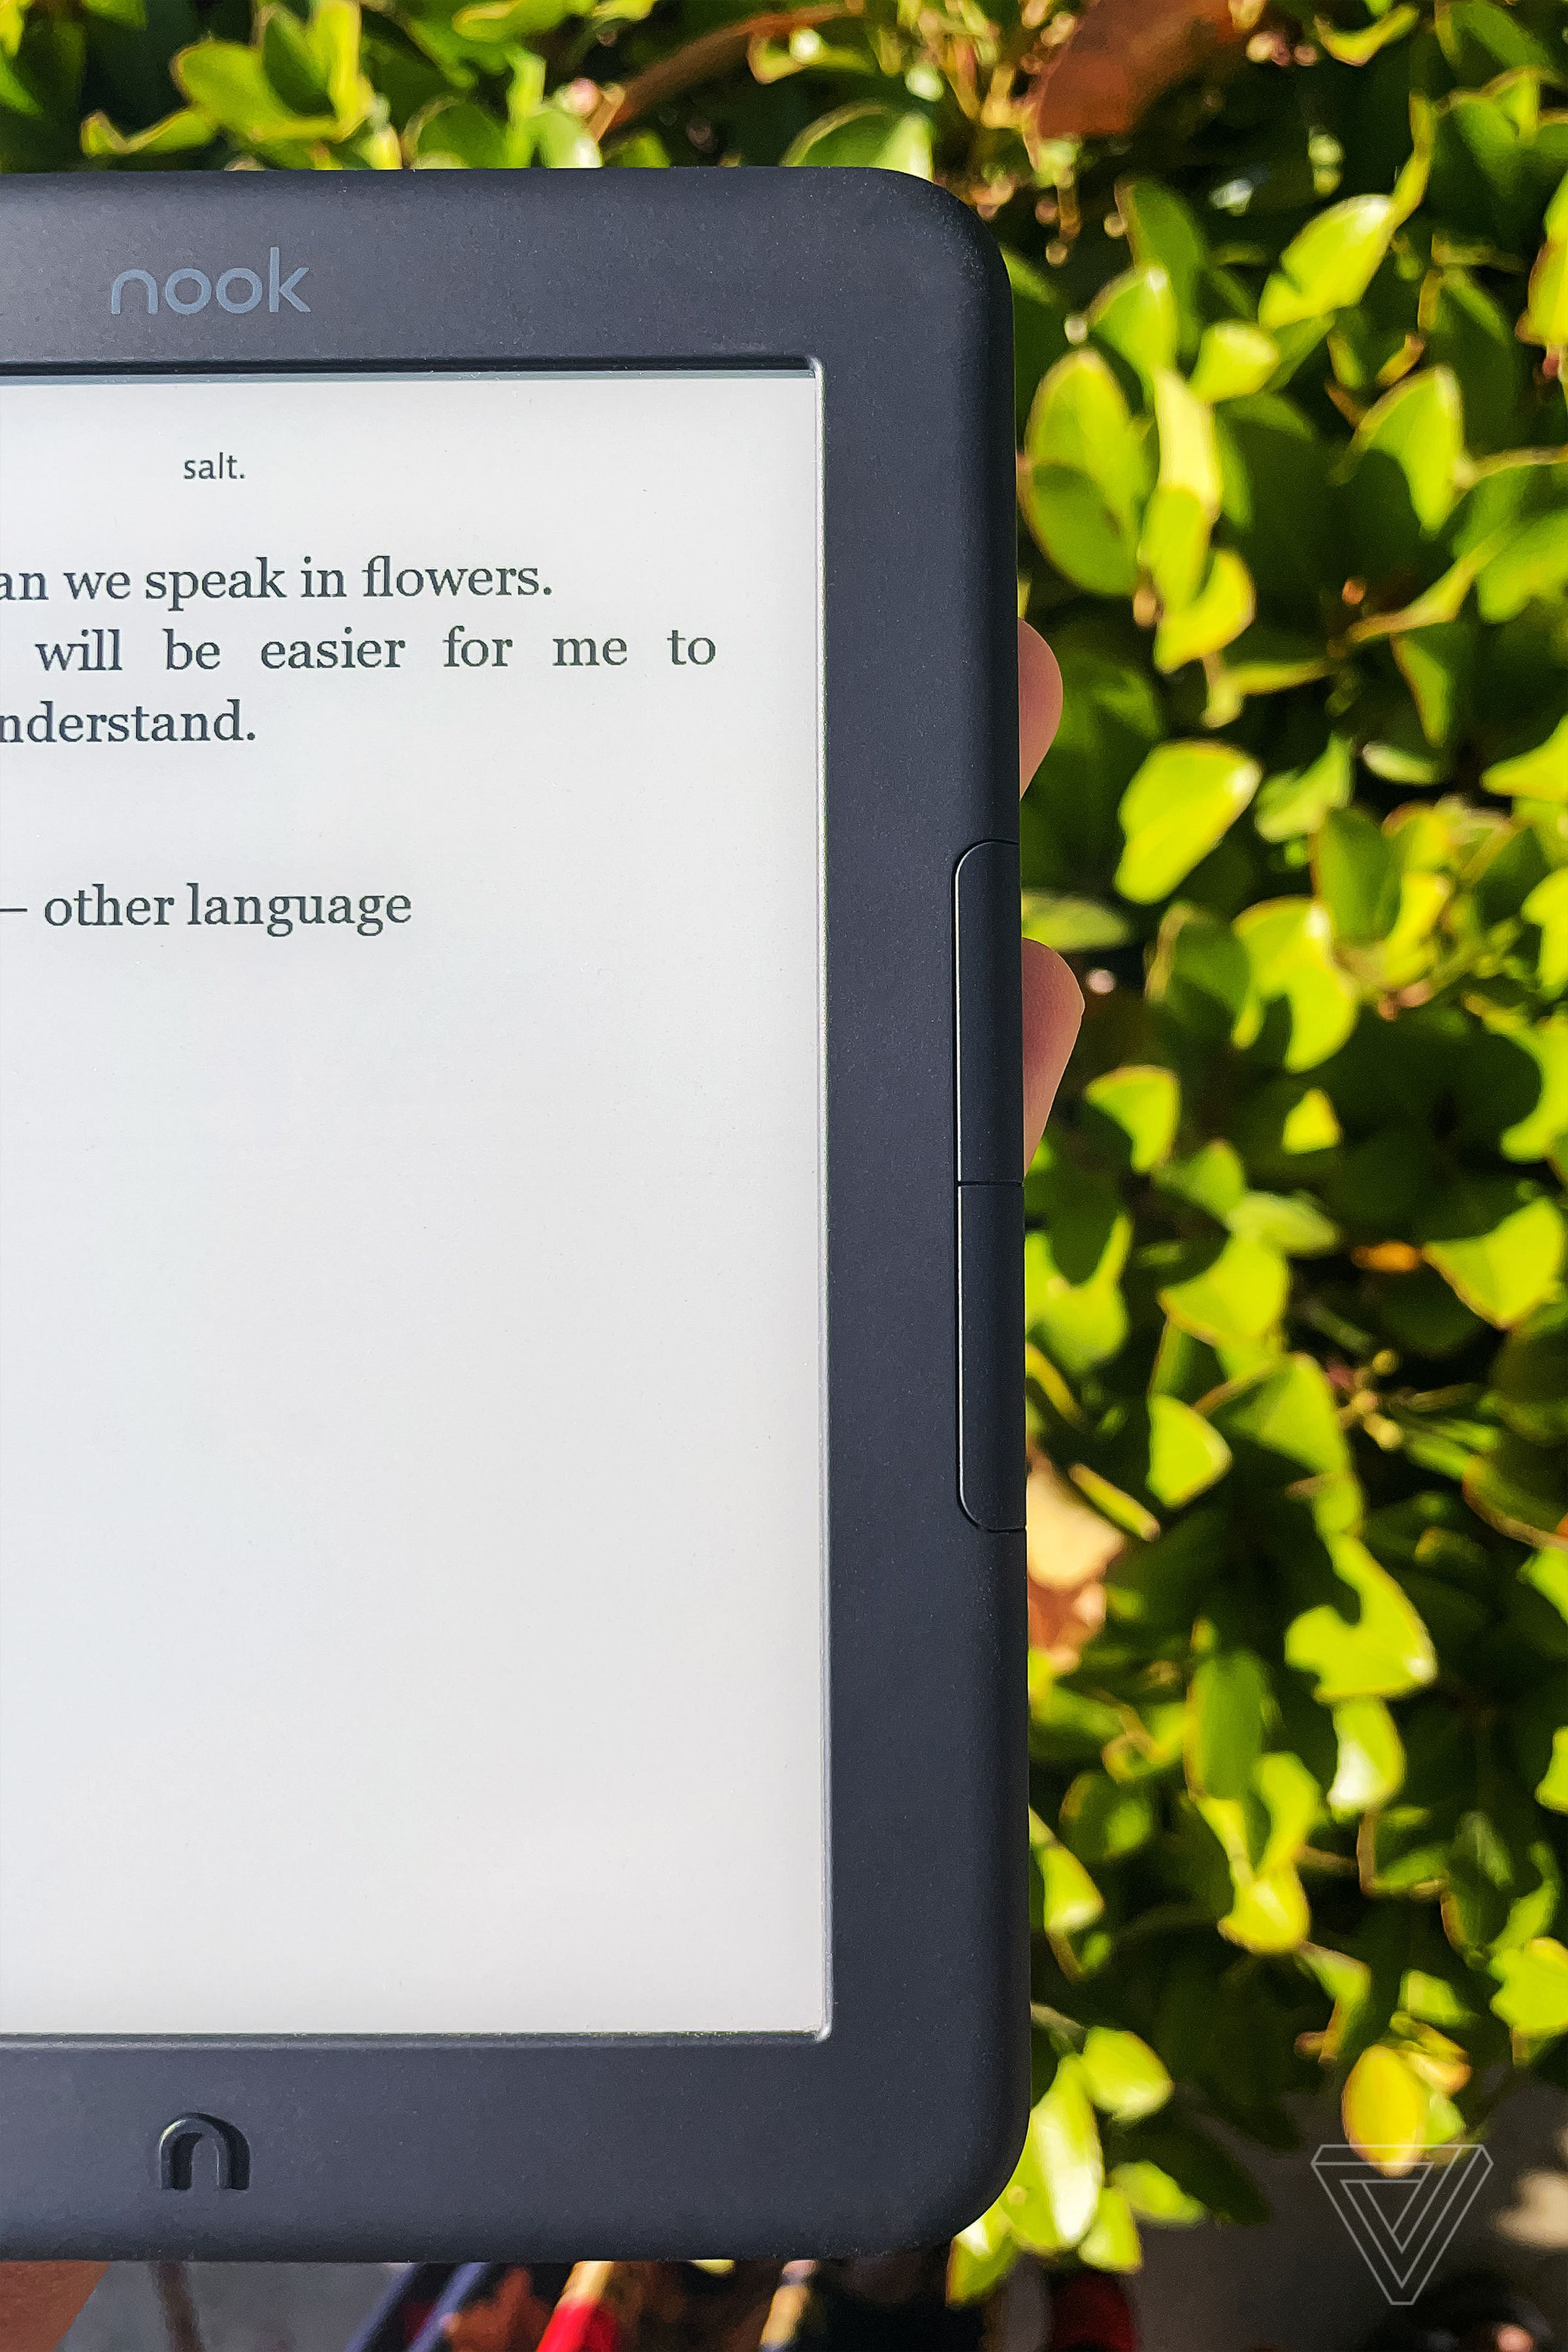 The Nook GlowLight 4e comes with physical page-turning buttons.